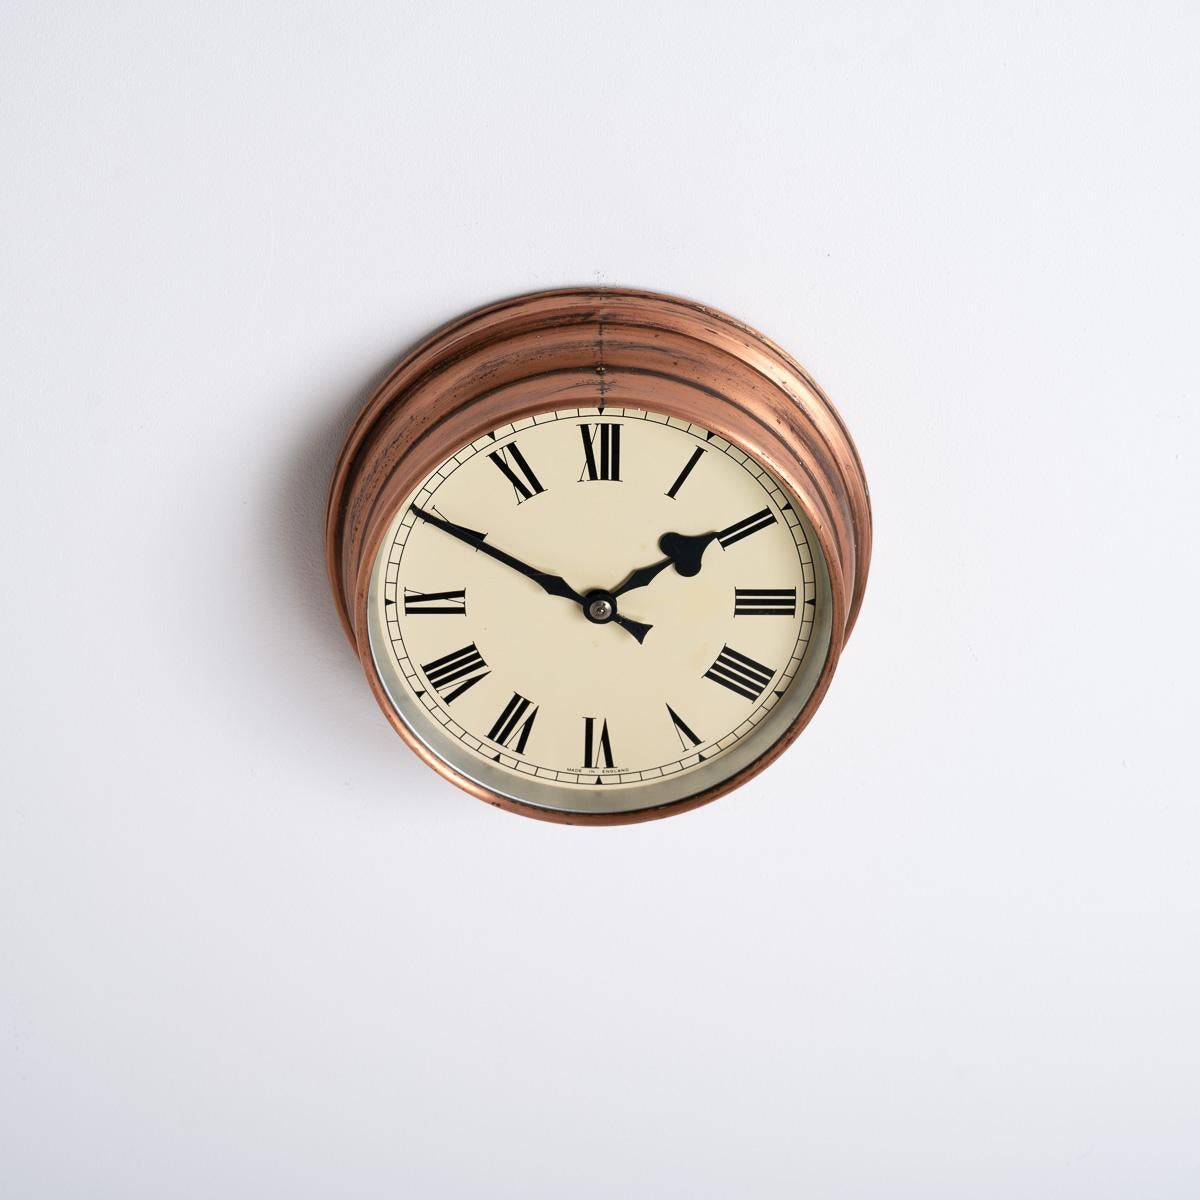 Reclaimed Industrial Aged Spun Copper Case Wall Clock By Synchronome 5